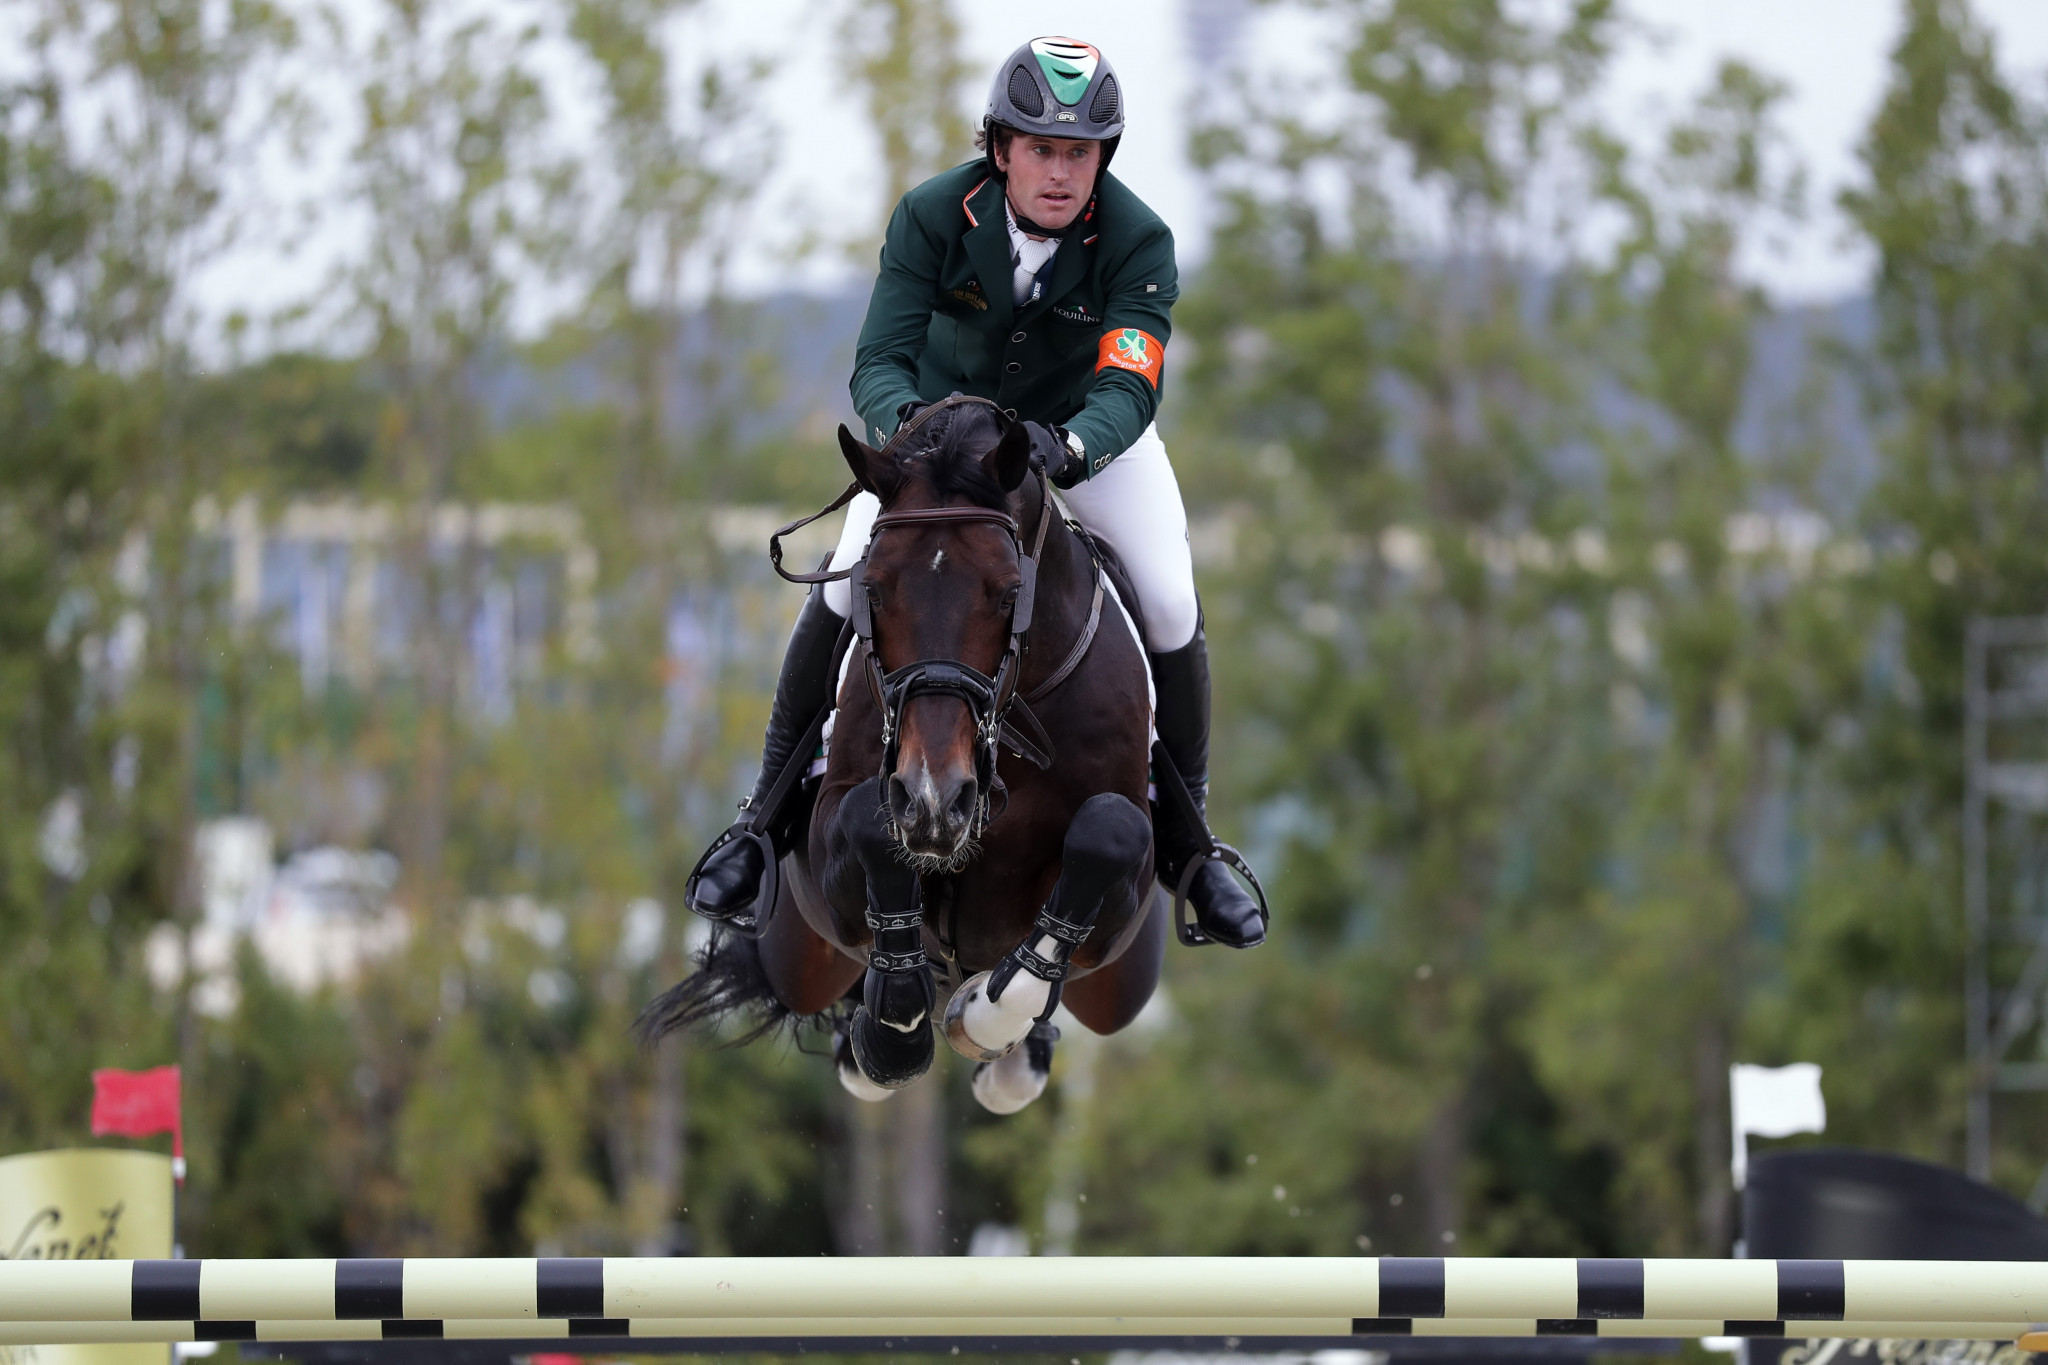 Irish rider Darragh Kenny won the last round in Monaco and is among those competing in Berlin ©Getty Images